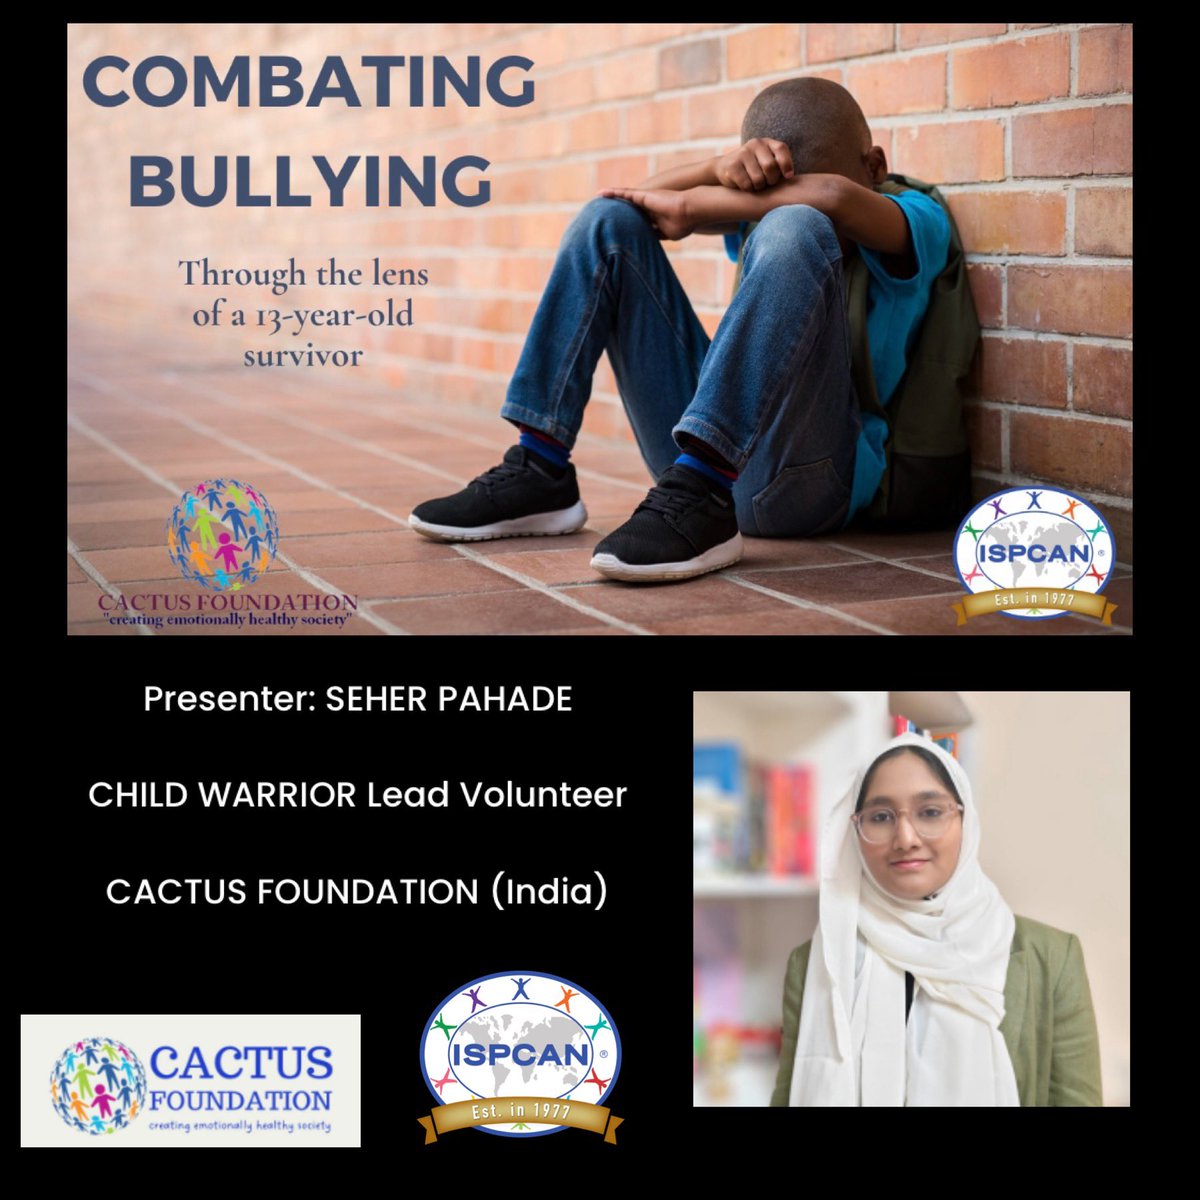 ISPCAN Webinar - Next week - April 17, 10:00am - 11:30am EDT. Please join us as we engage the voice of youth by understanding methods, strategies, and interventions to prevent all forms of bullying authored and presented by a young survivor. Learn ways to create a safe physical,